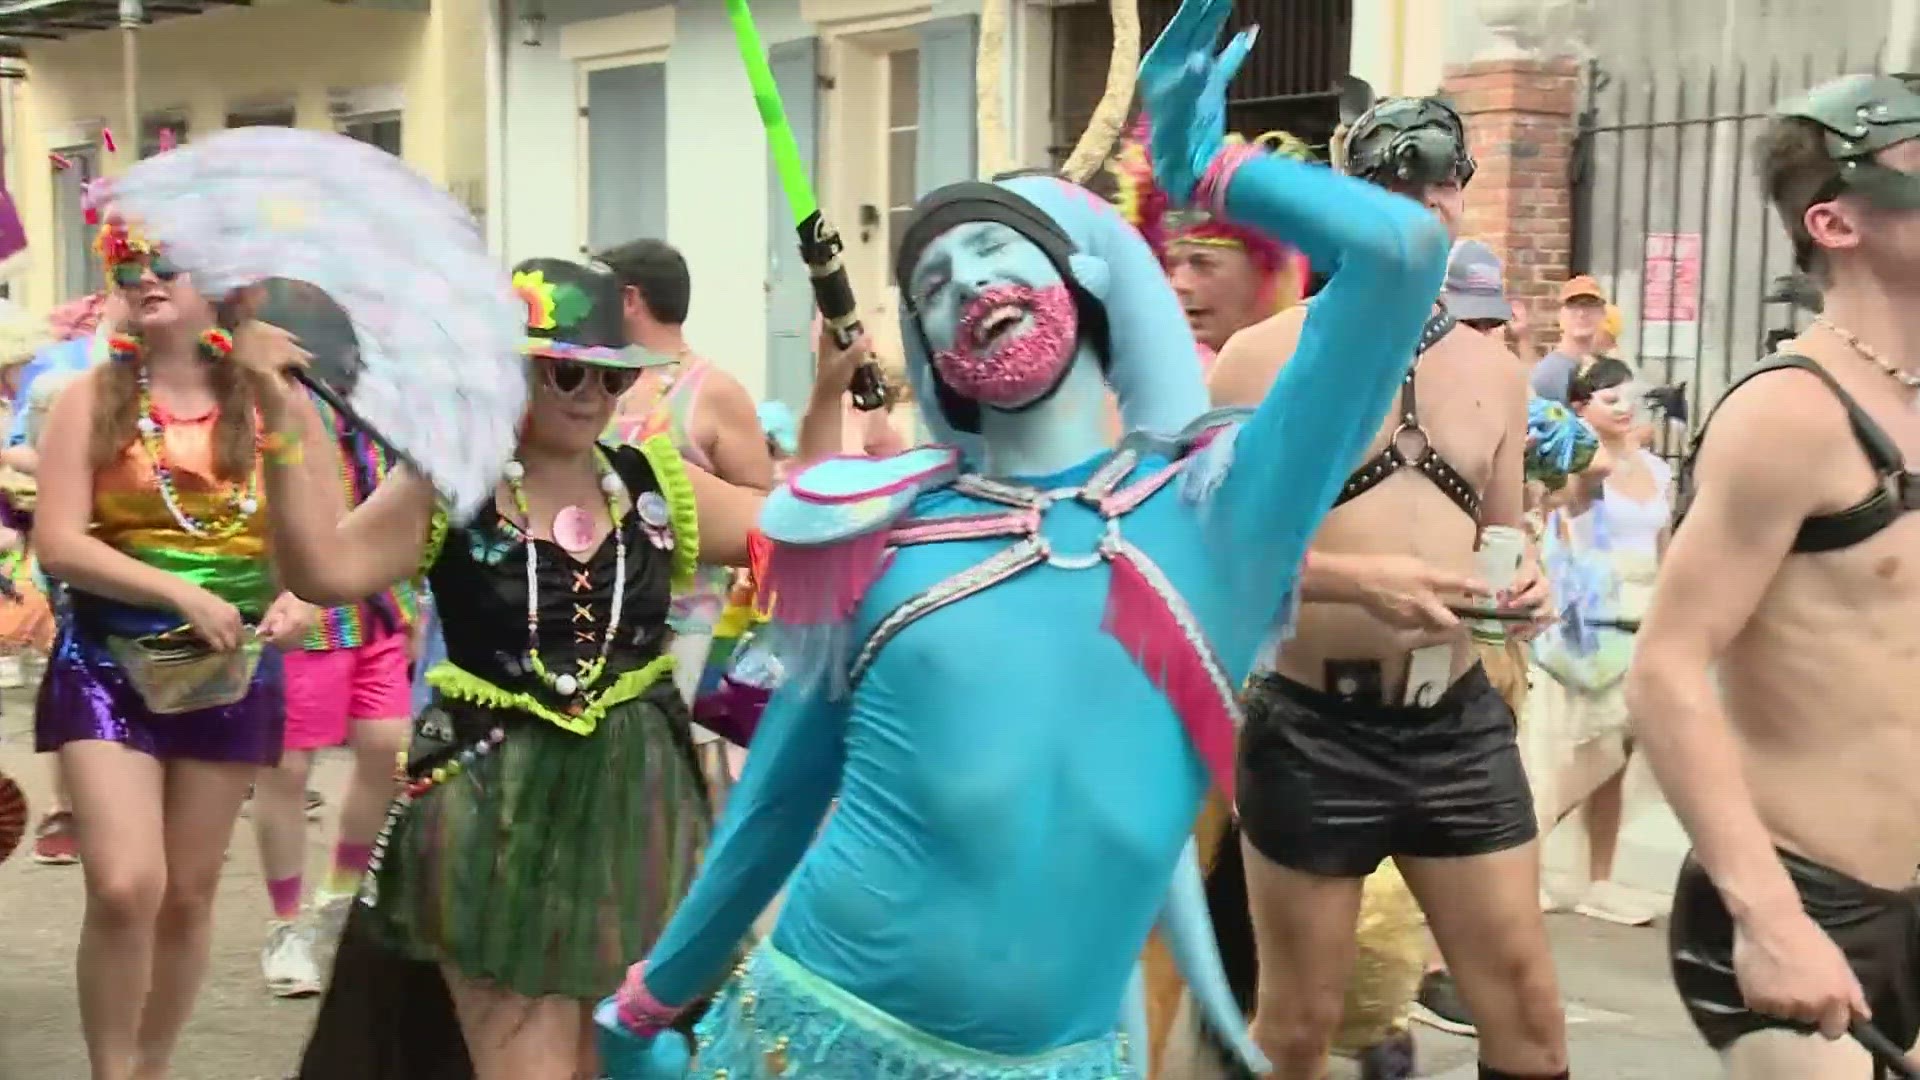 Southern Decadence has big weekend in New Orleans as annual party rolls